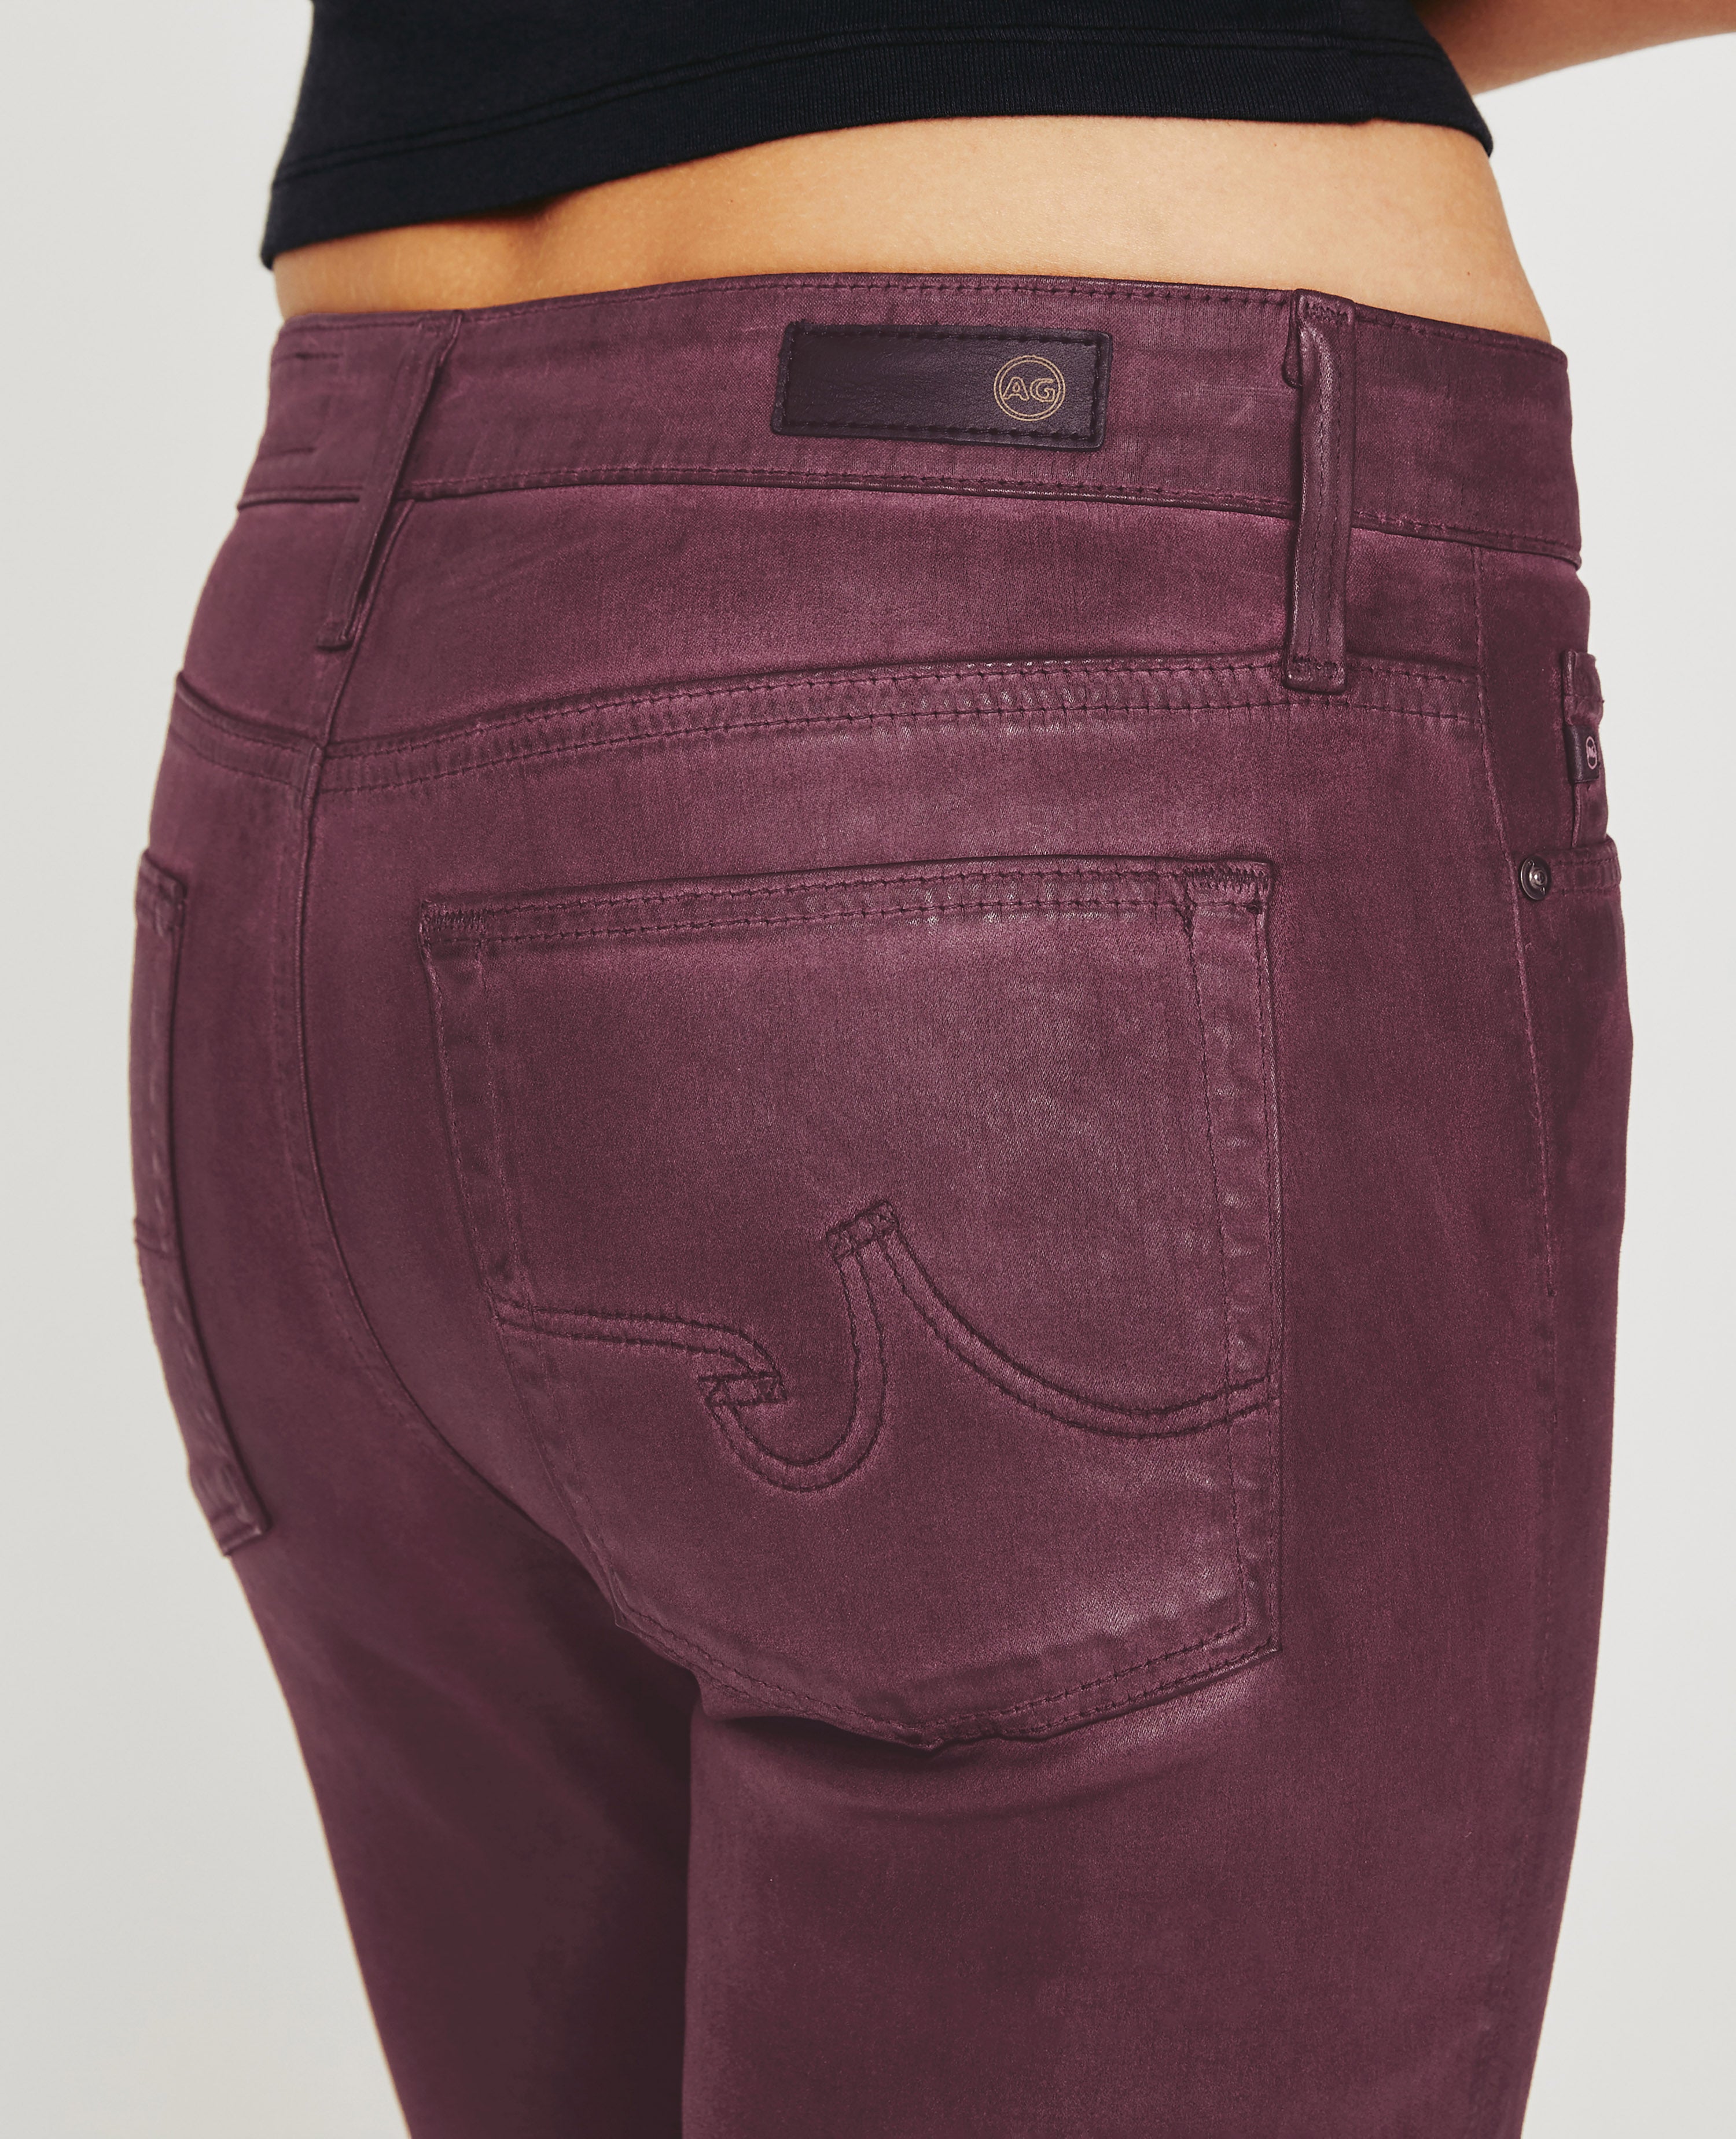 Lee Riveted Vintage Maroon Denim Jeans | size 8 med | Made in U.S.A. –  Pretty Old